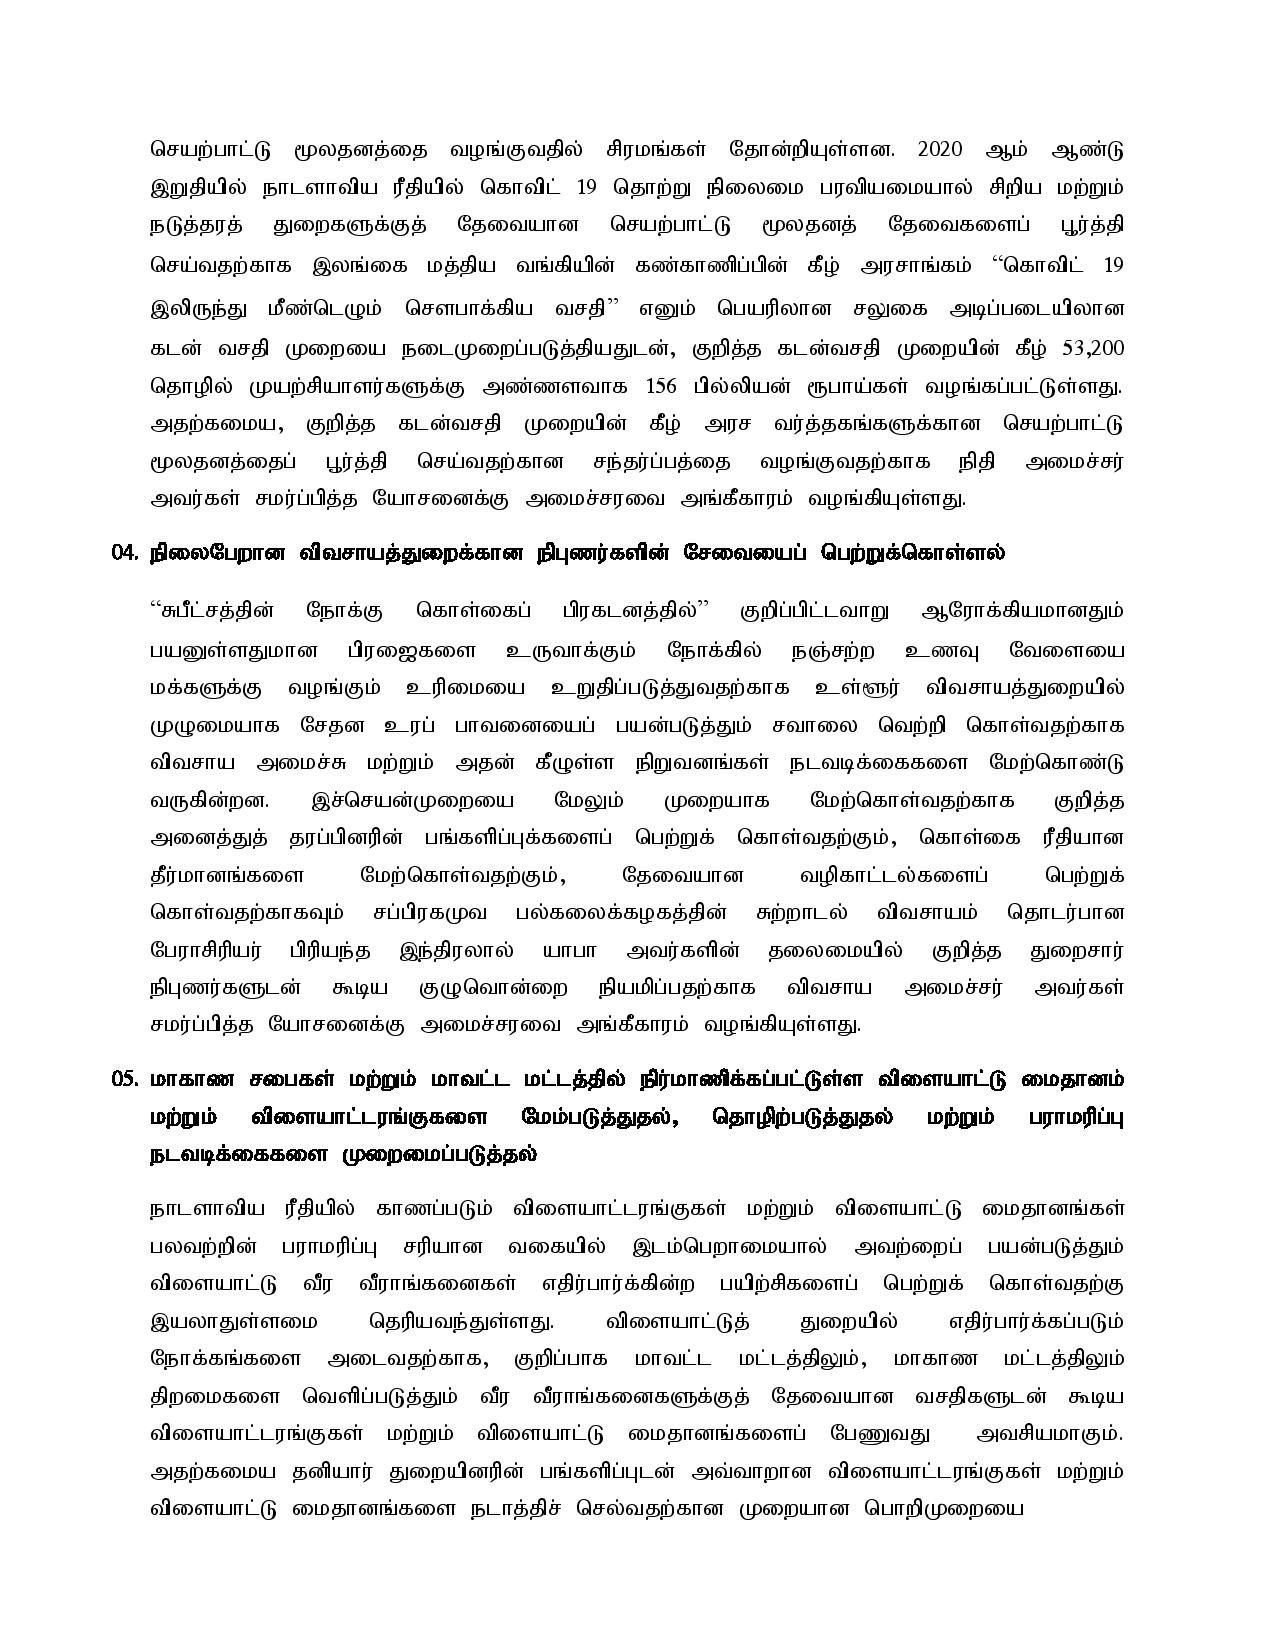 Cabinet Decision on 2021.08.09 Tamil page 002